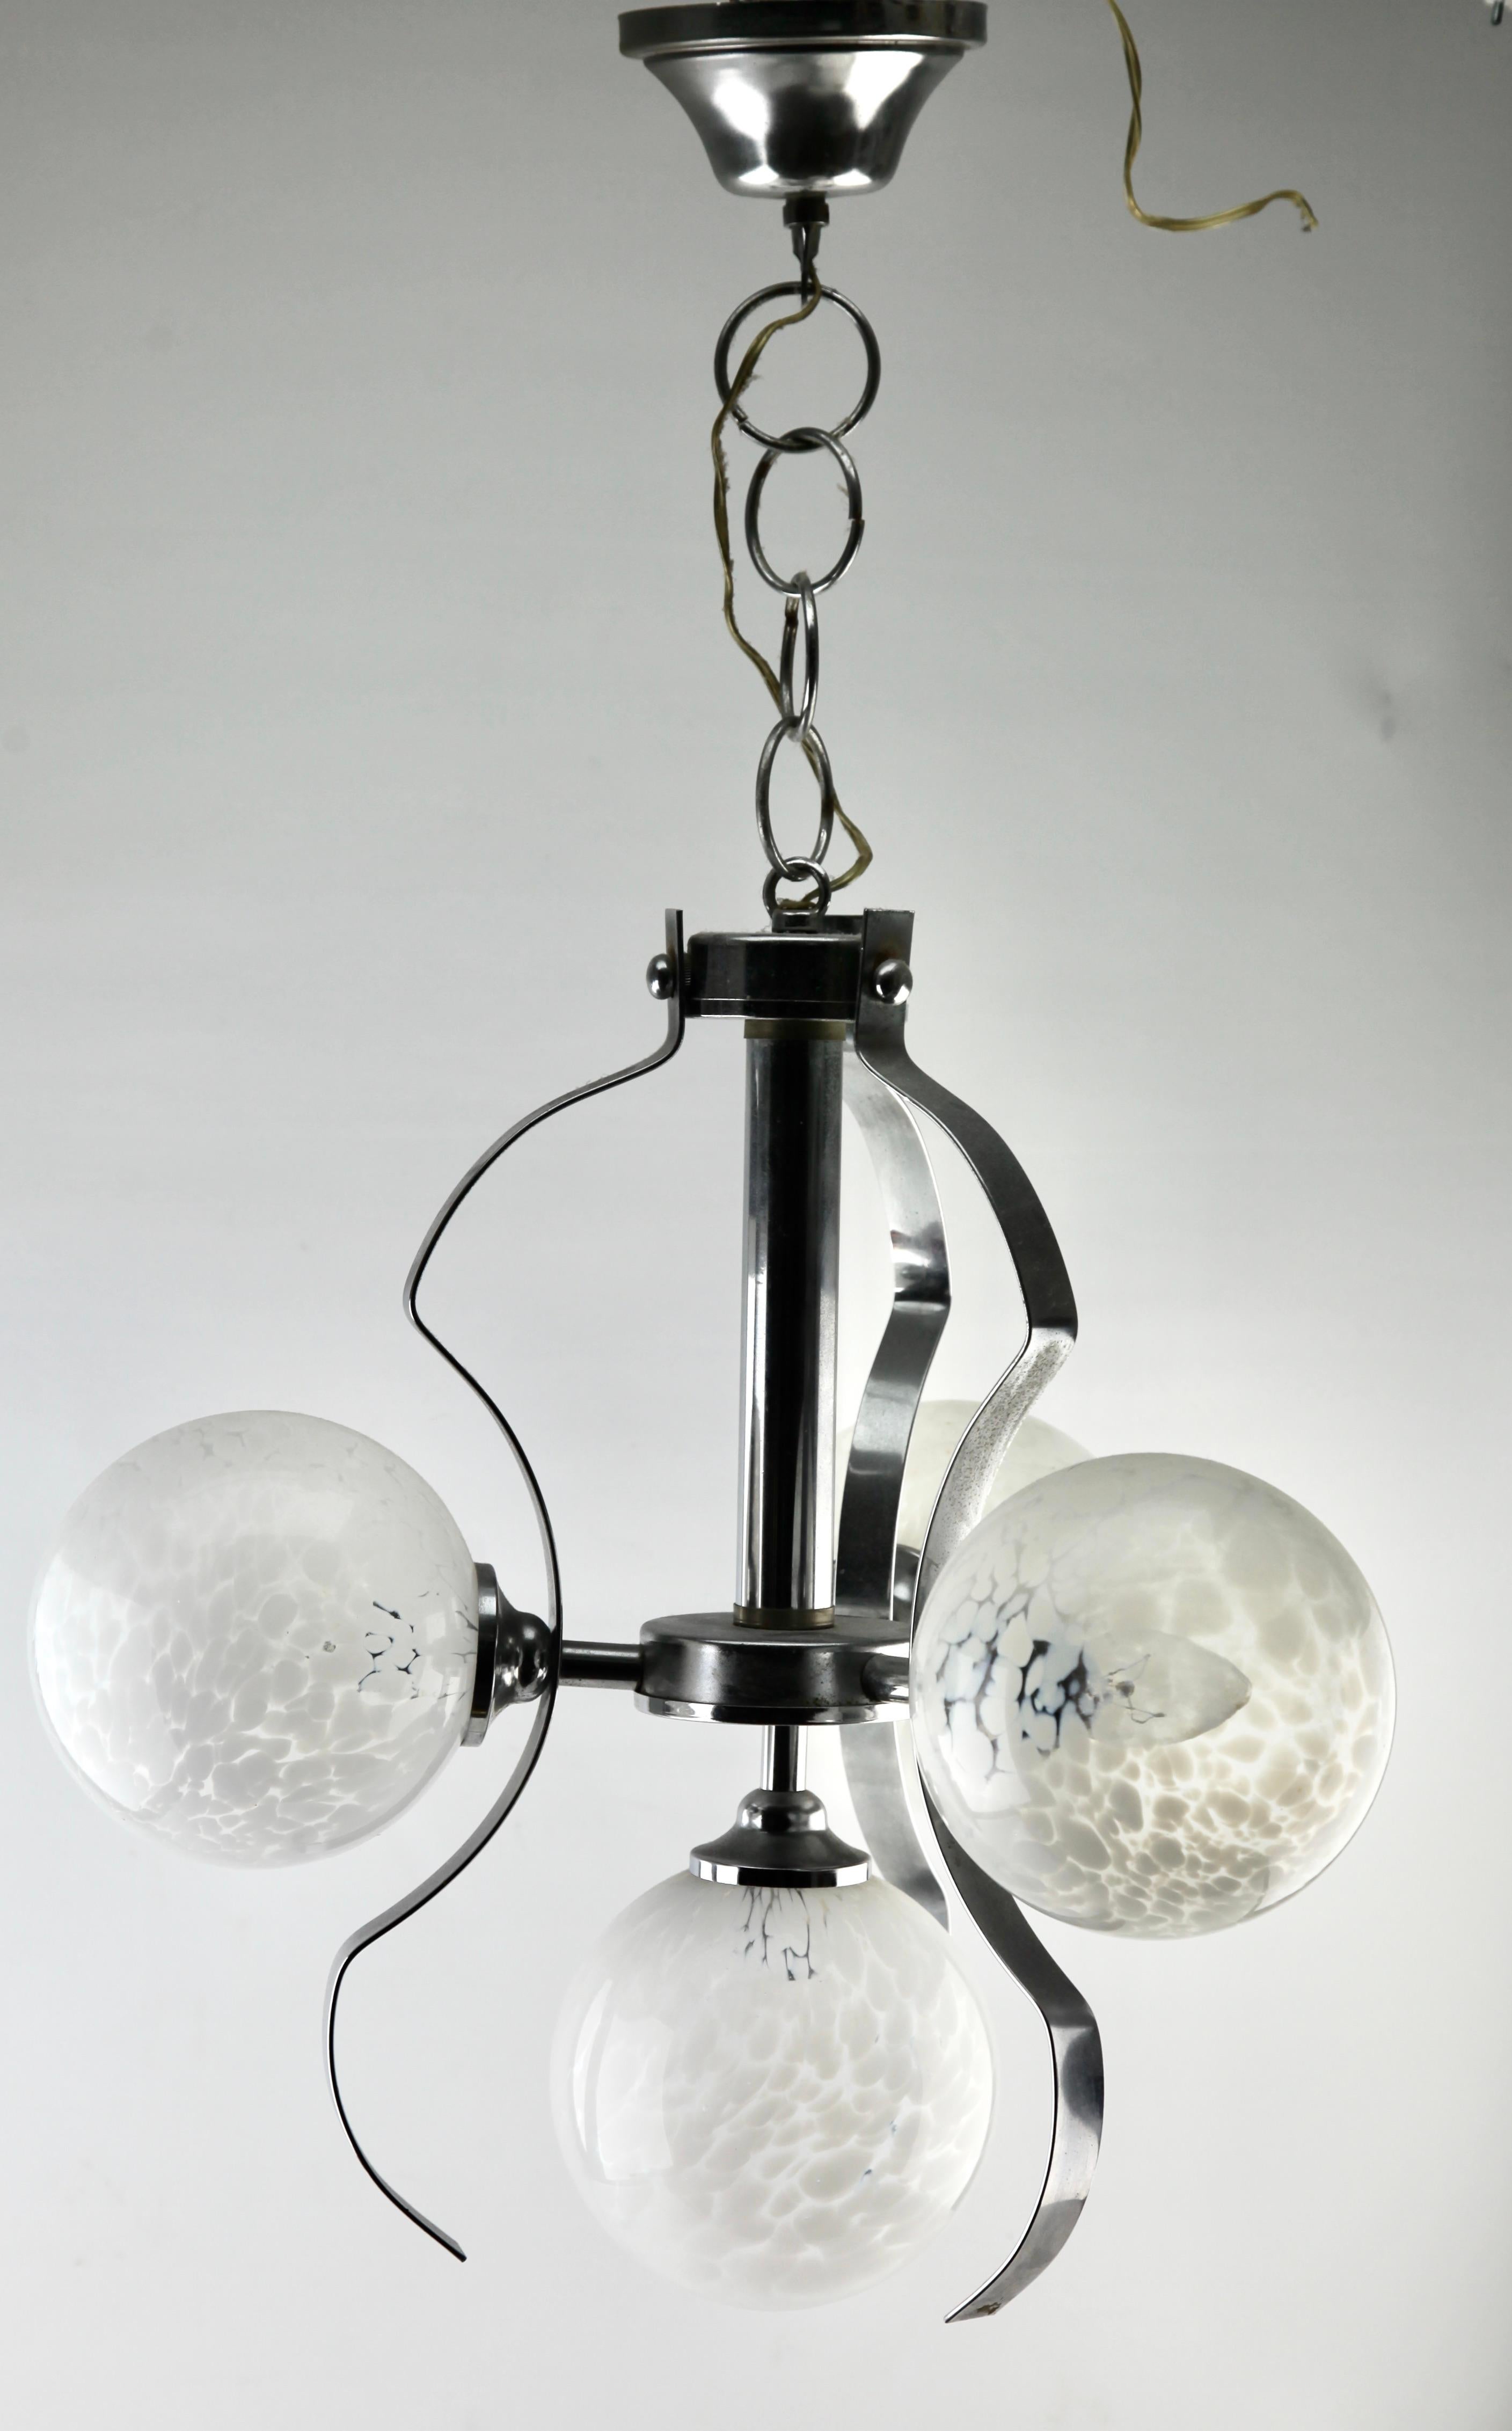 From the range by the Fischer Leuchten Company, this center-light features five lamps arranged as two pairs) on a central chromed stem. Each lamp has a fitting on a chromed plate, and each holds a round globular shade of clear glass sculpted to